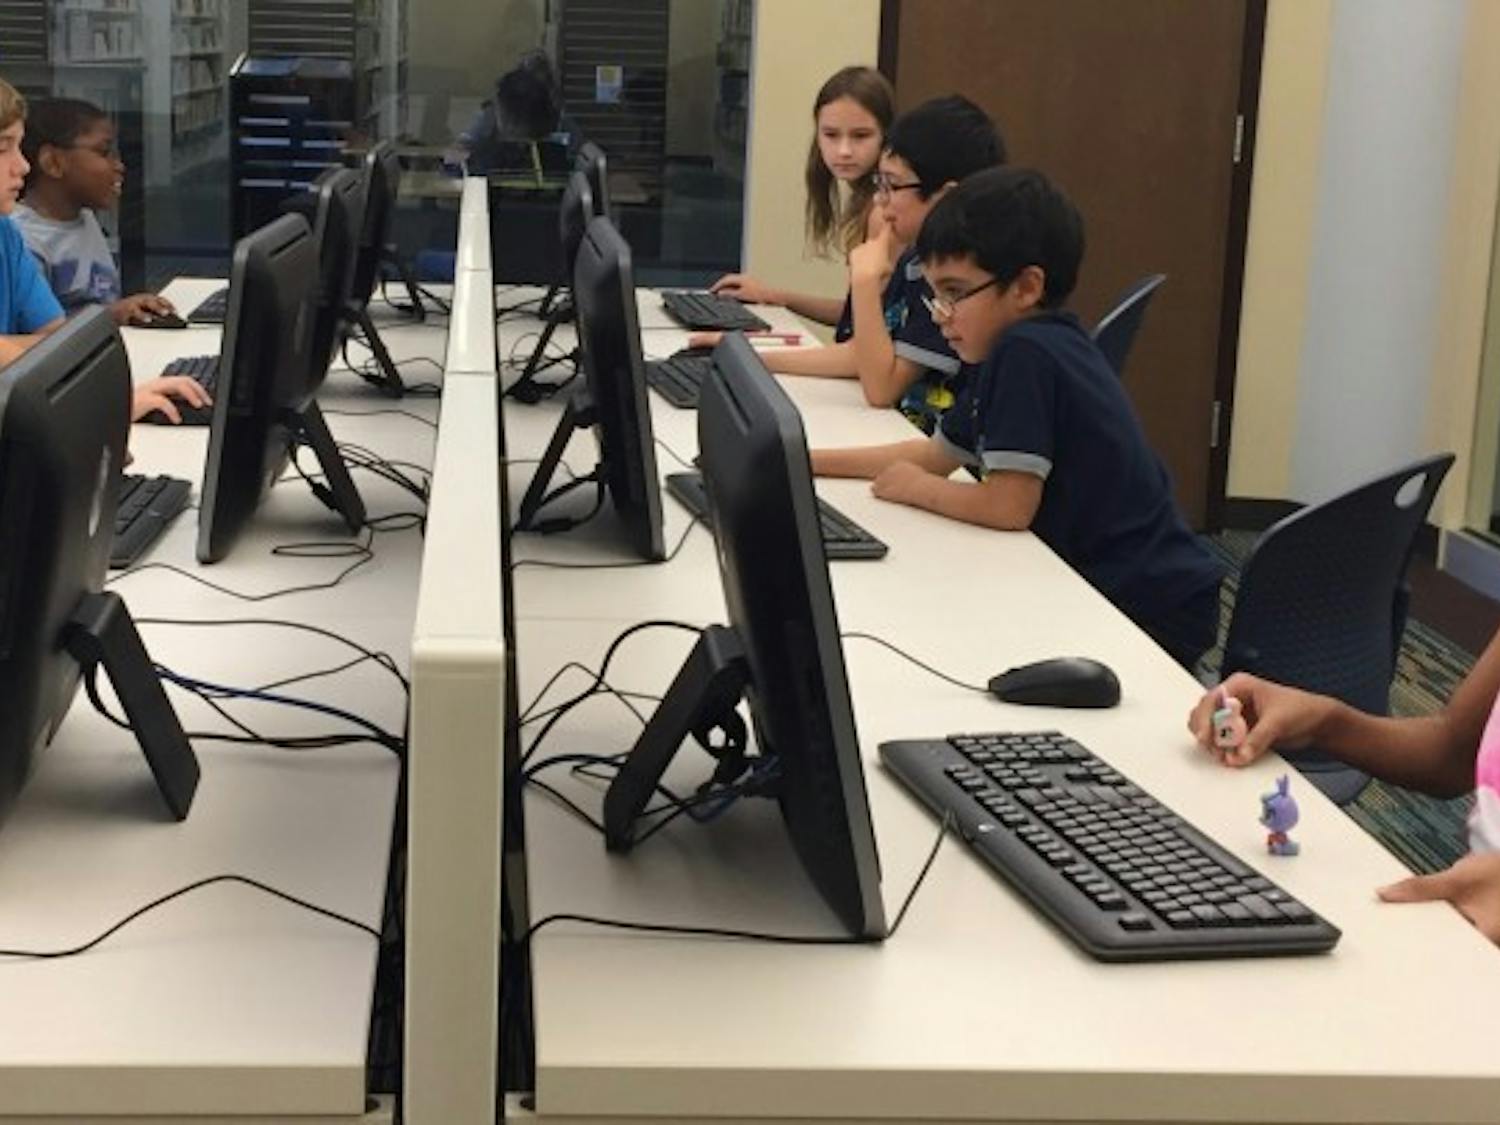 Kids Code, a startup featured at the 2019 Innovation Showcase, focuses on teaching children in low-income communities how to code. This photo was taken May 2017 during a Kids Code Saturday Workshop at the Southwest Chatham Live Oak Public Library in Savannah, Georgia, where the program originated. Contributed by Angel Patel.